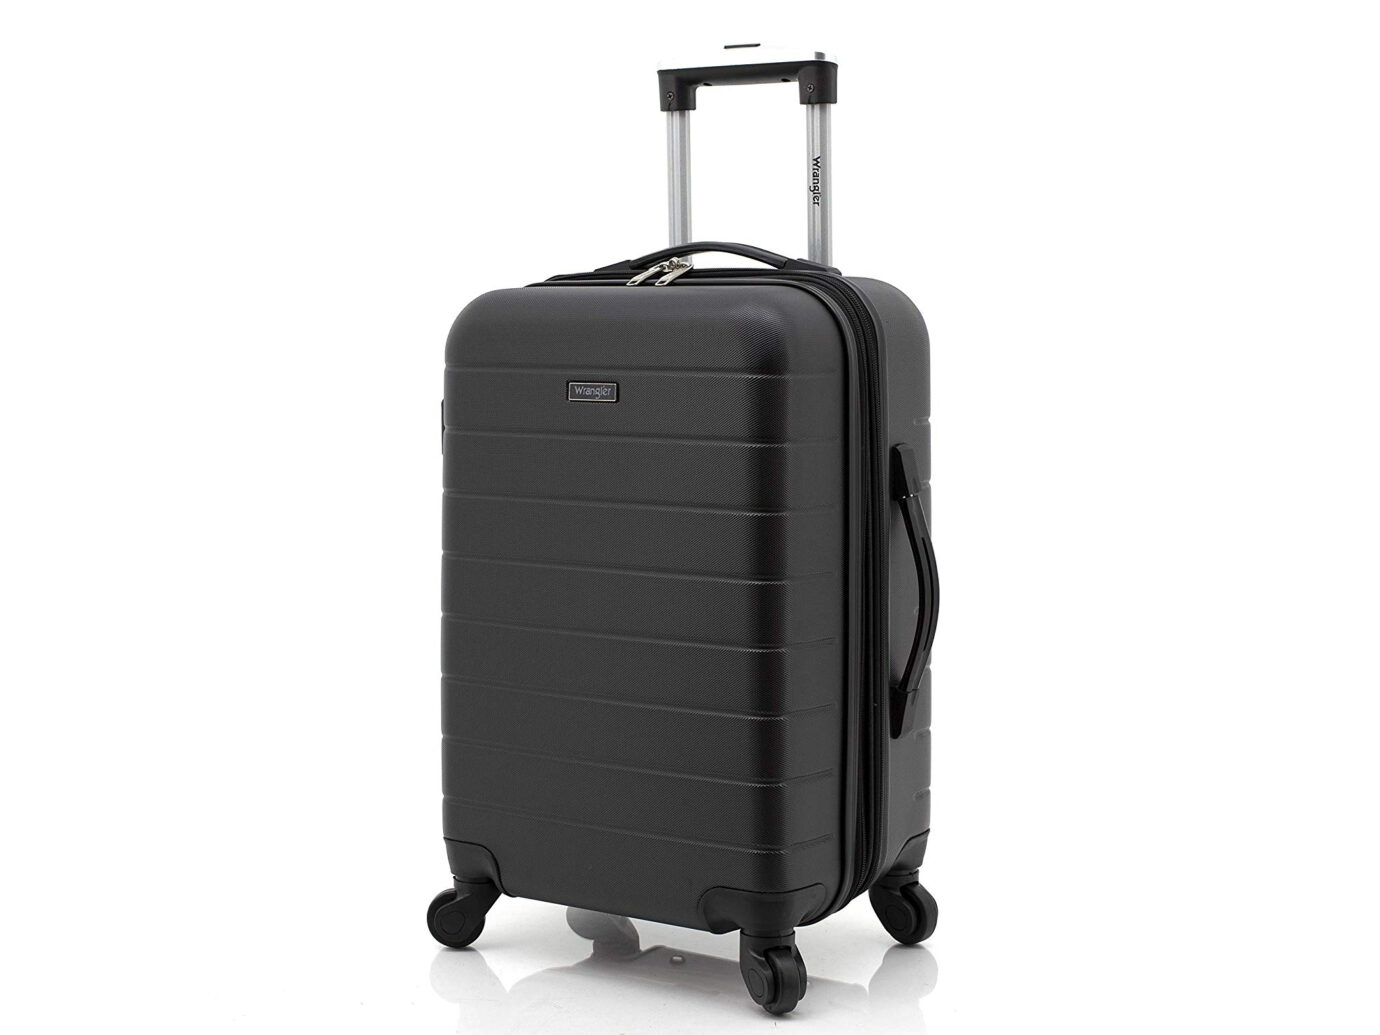 Wrangler 20-Inch Smart Spinner Carry-On Luggage